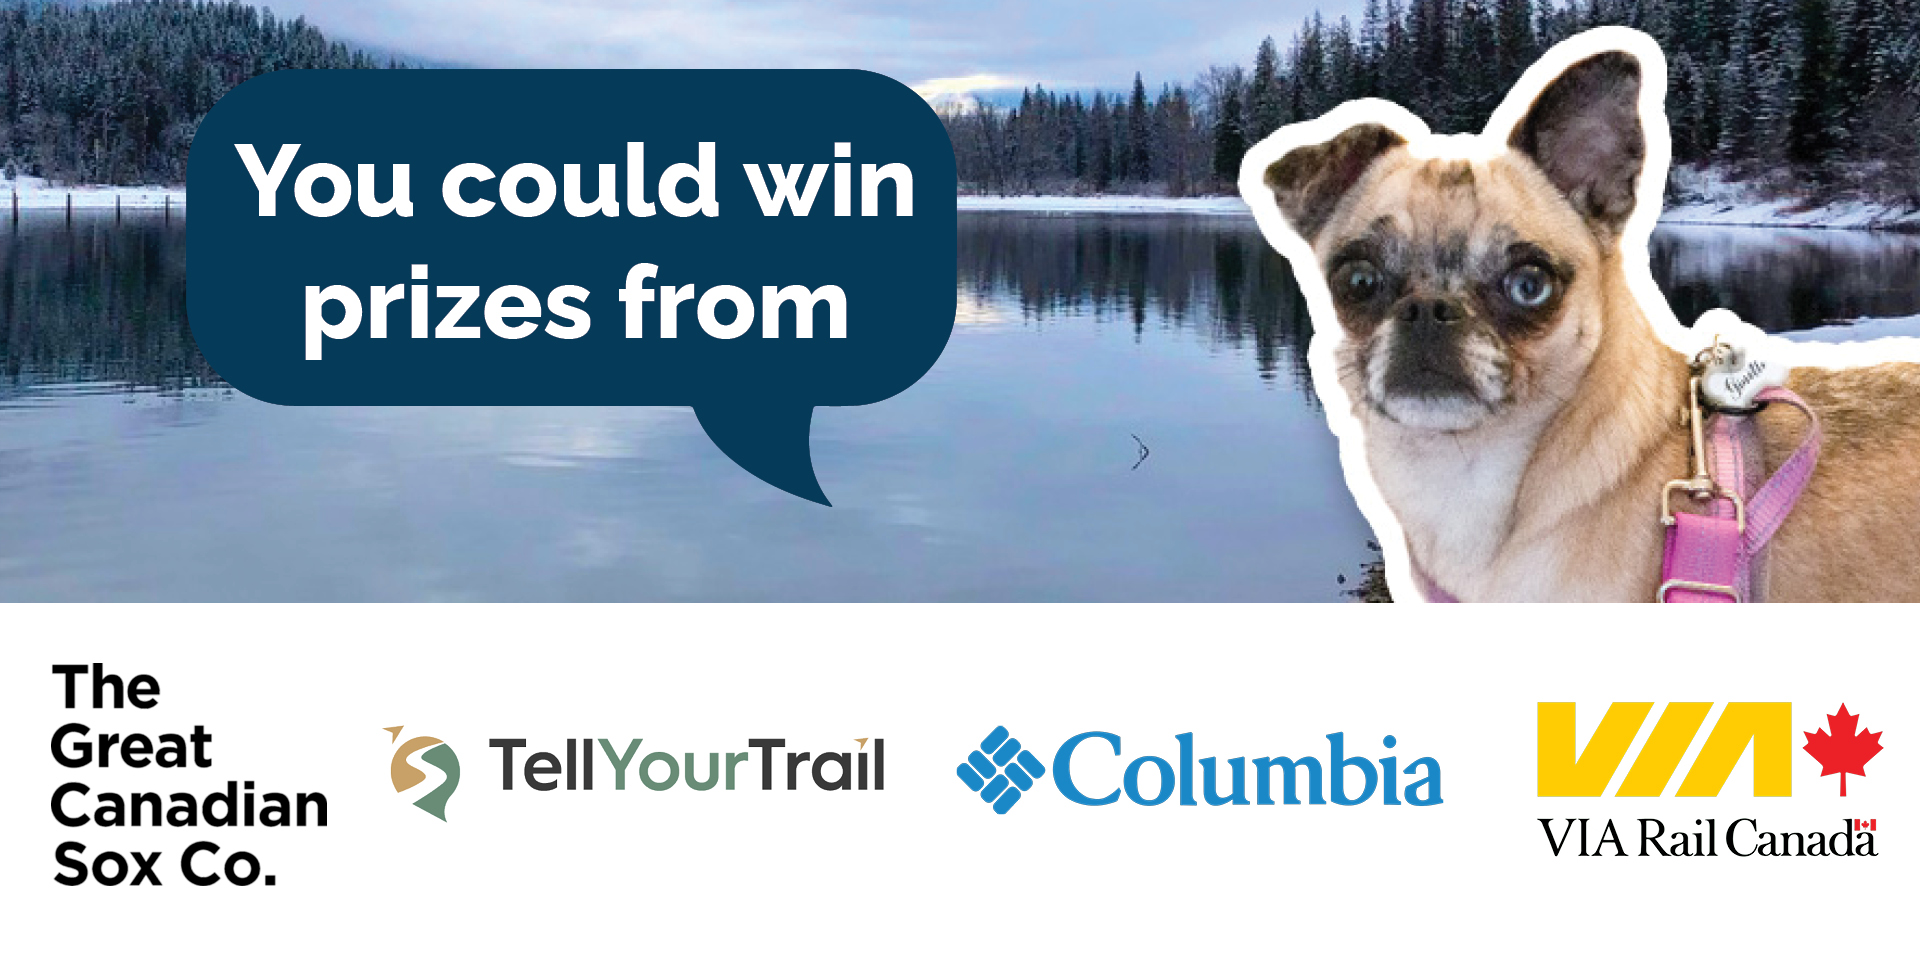 Photo of Ginette with speech bubble saying "You could win prizes from", showing logos for The Great Canadian Sox Co., Tell Your Trail, Columbia Sportswear and VIA Rail Canada.